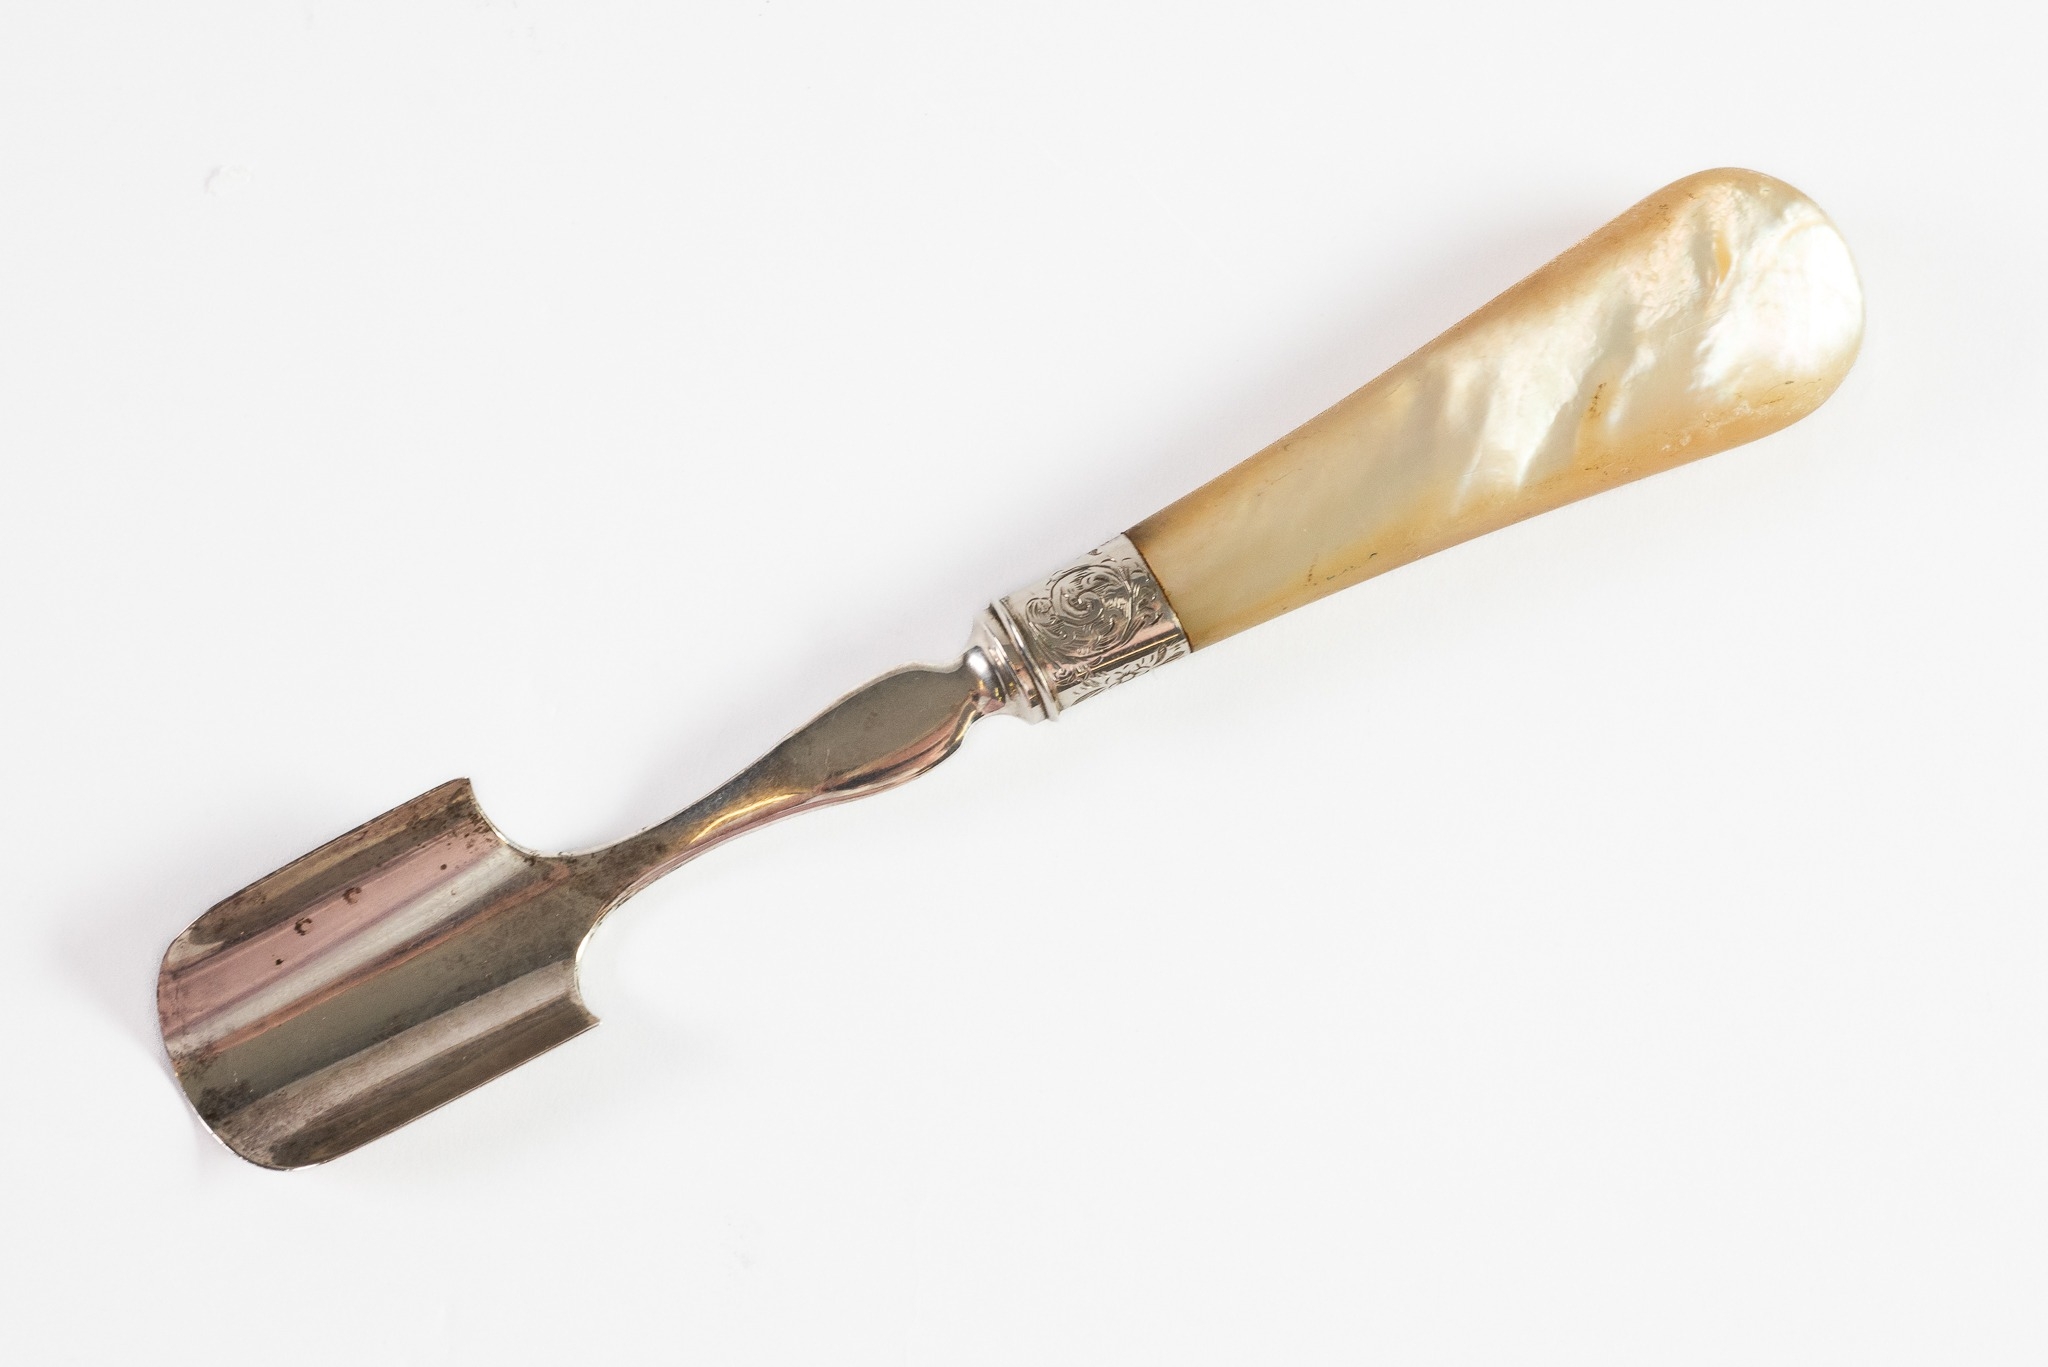 NINETEENTH CENTURY SILVER STILTON SCOOP WITH MOTHER OF PEARL HANDLE, of typical form with engraved